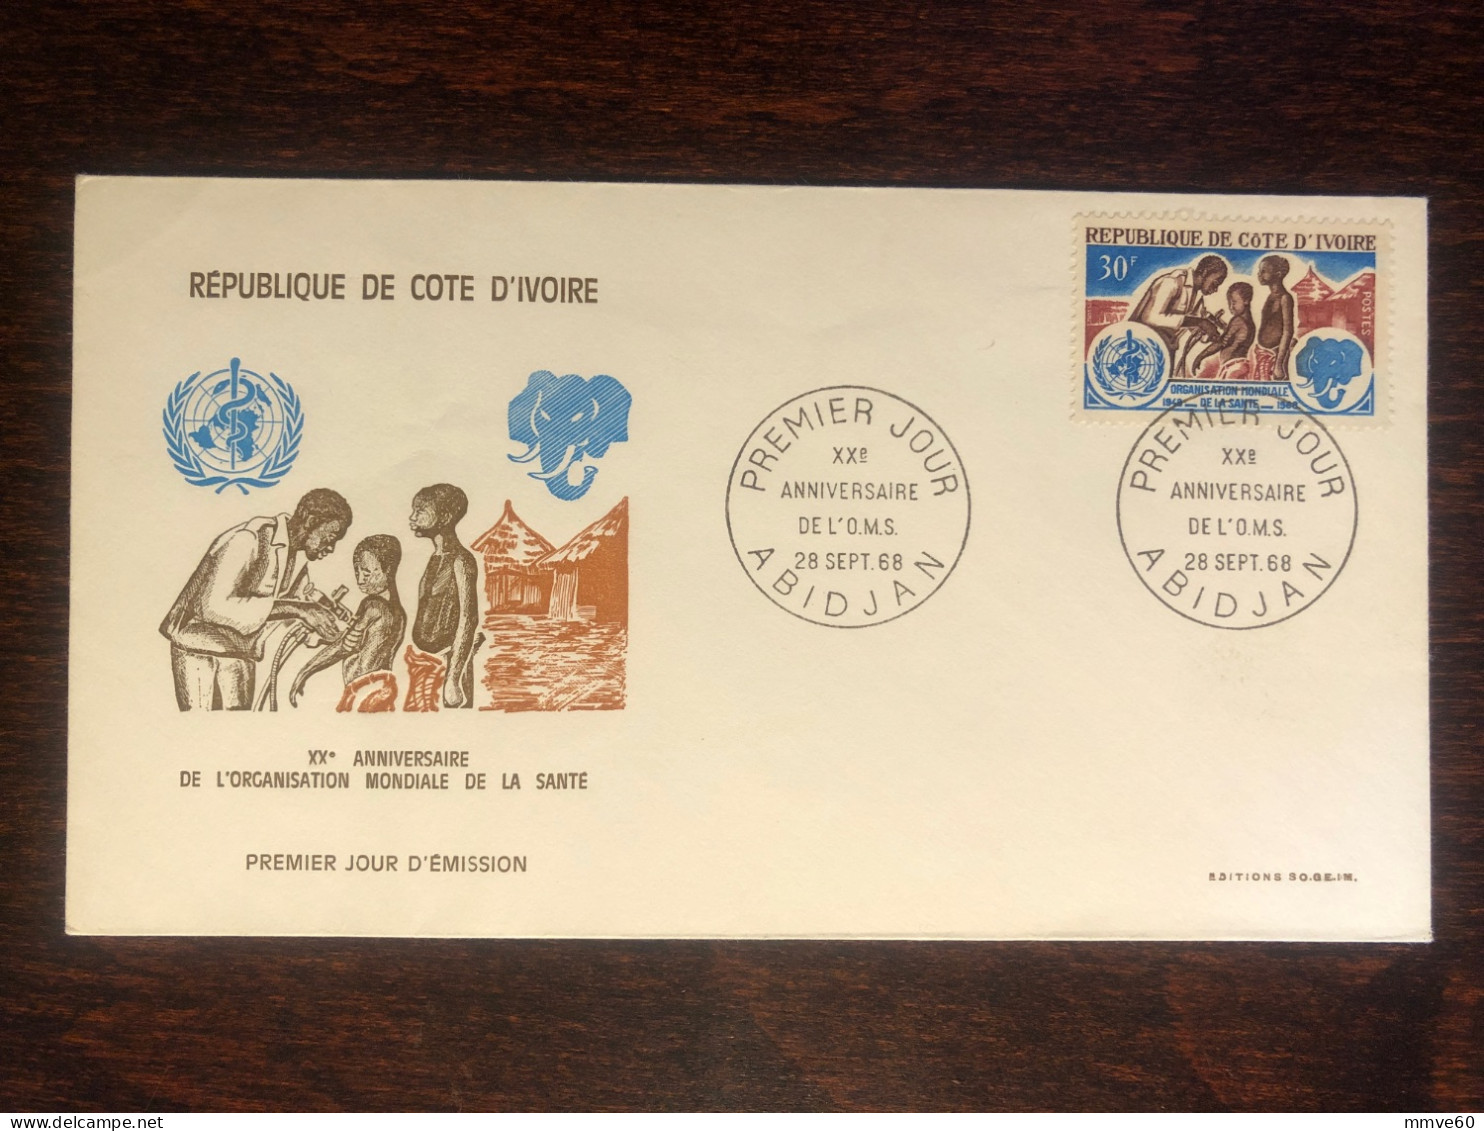 IVORY COAST COTE D’IVOIRE FDC COVER 1968 YEAR WHO IMMUNIZATION HEALTH MEDICINE STAMPS - Ivoorkust (1960-...)